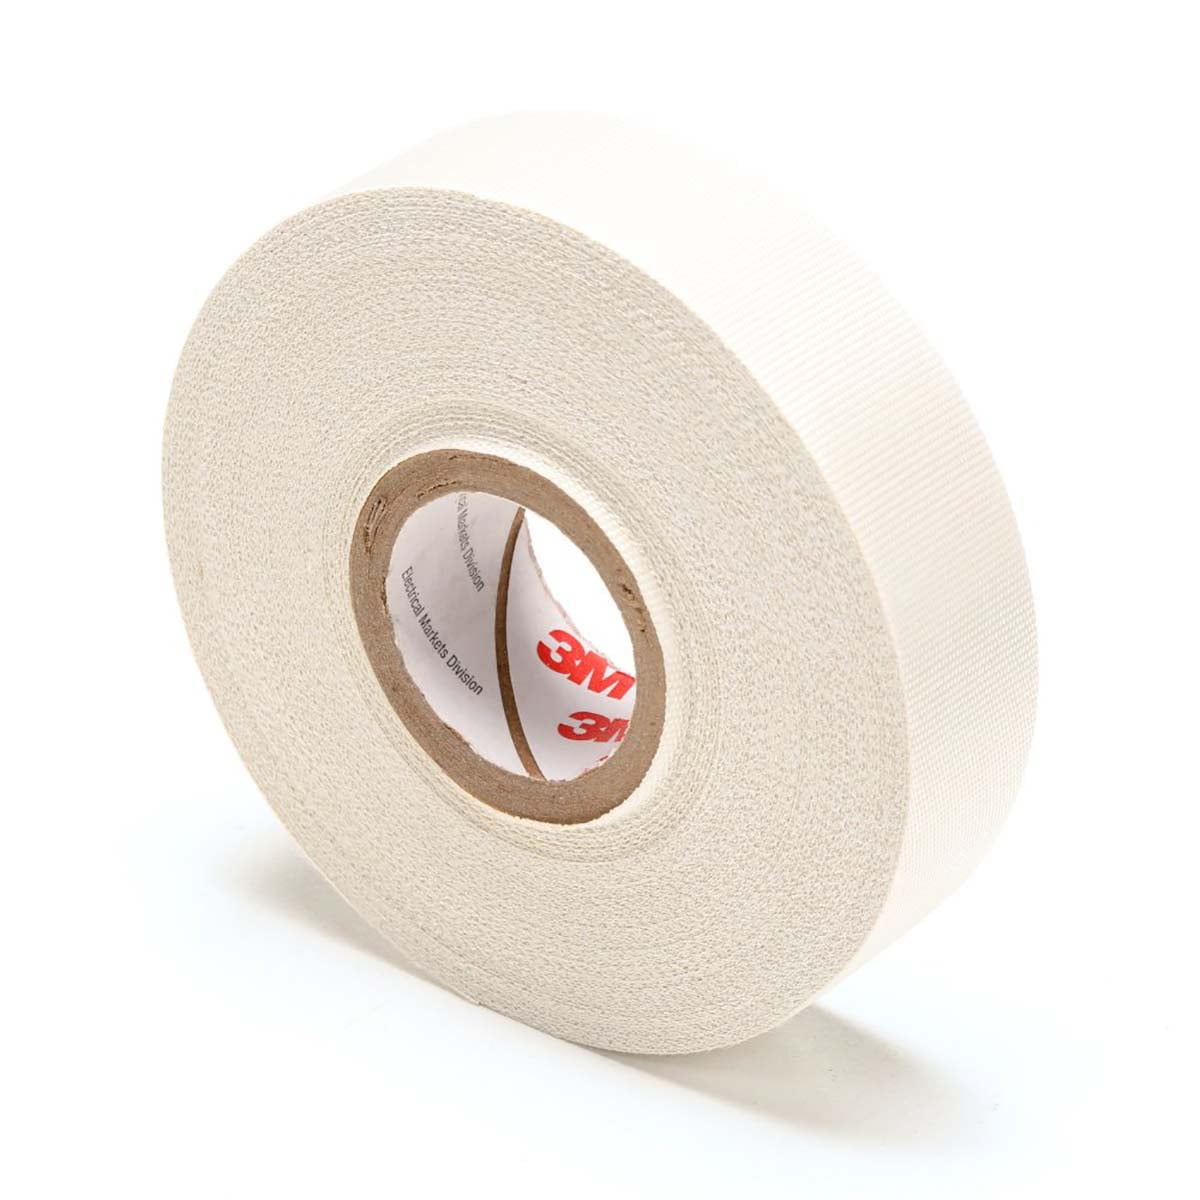 TM 80012020360 New 3/4 in x 66 ft Glass Cloth Electrical Tape 27 3M 